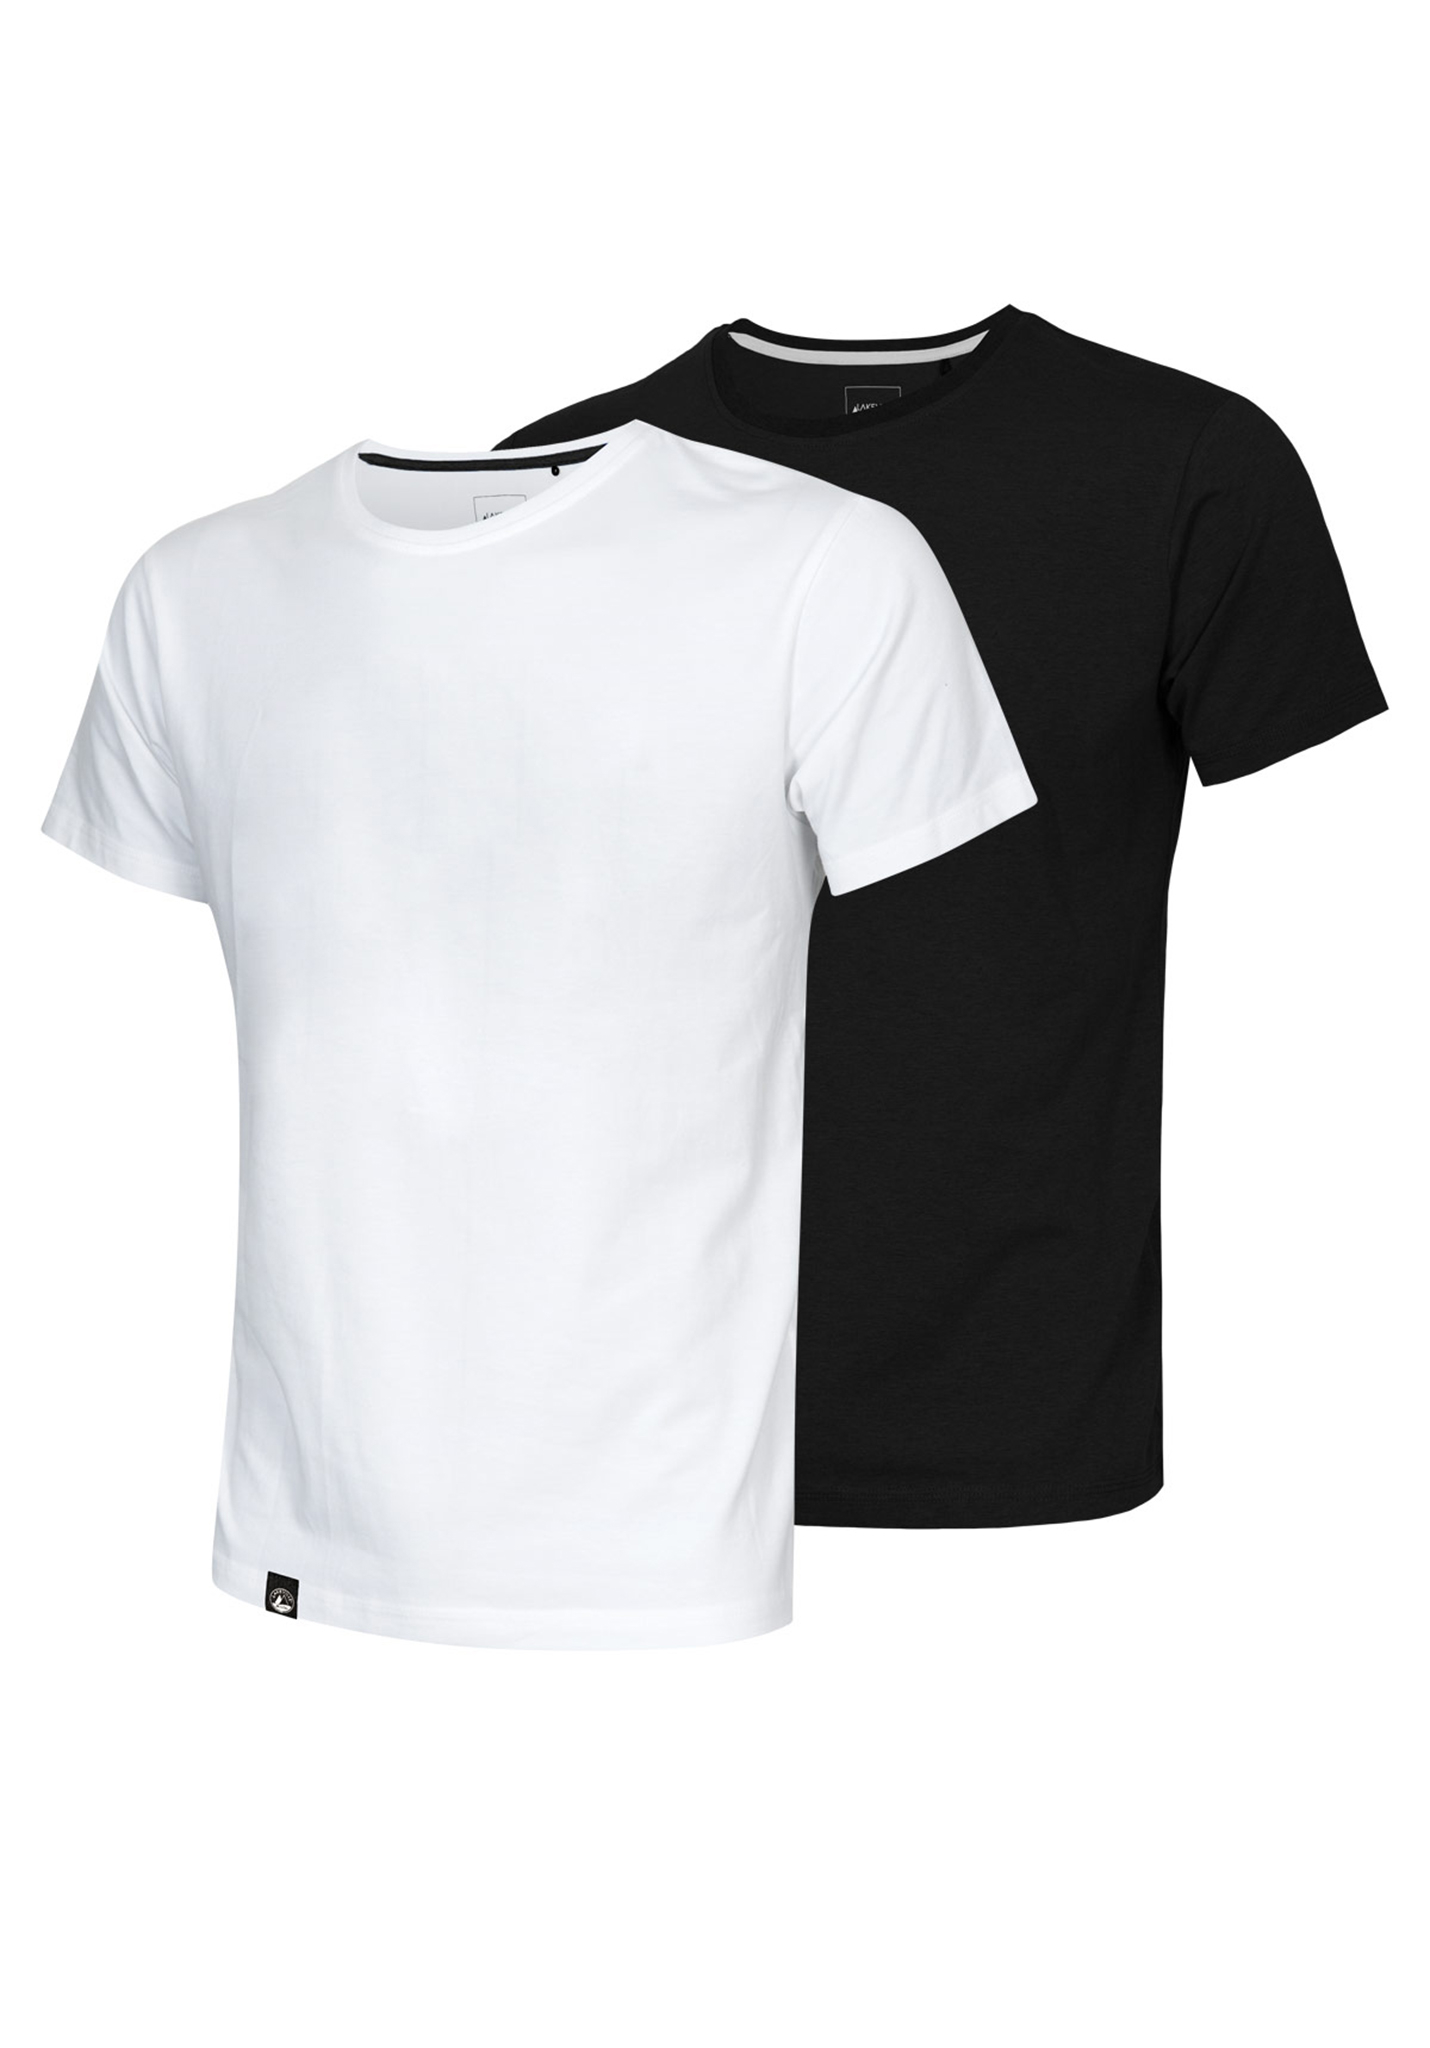 Lakeville Mountain Round Neck Double Pack Body Fit T-Shirt black + white XXL